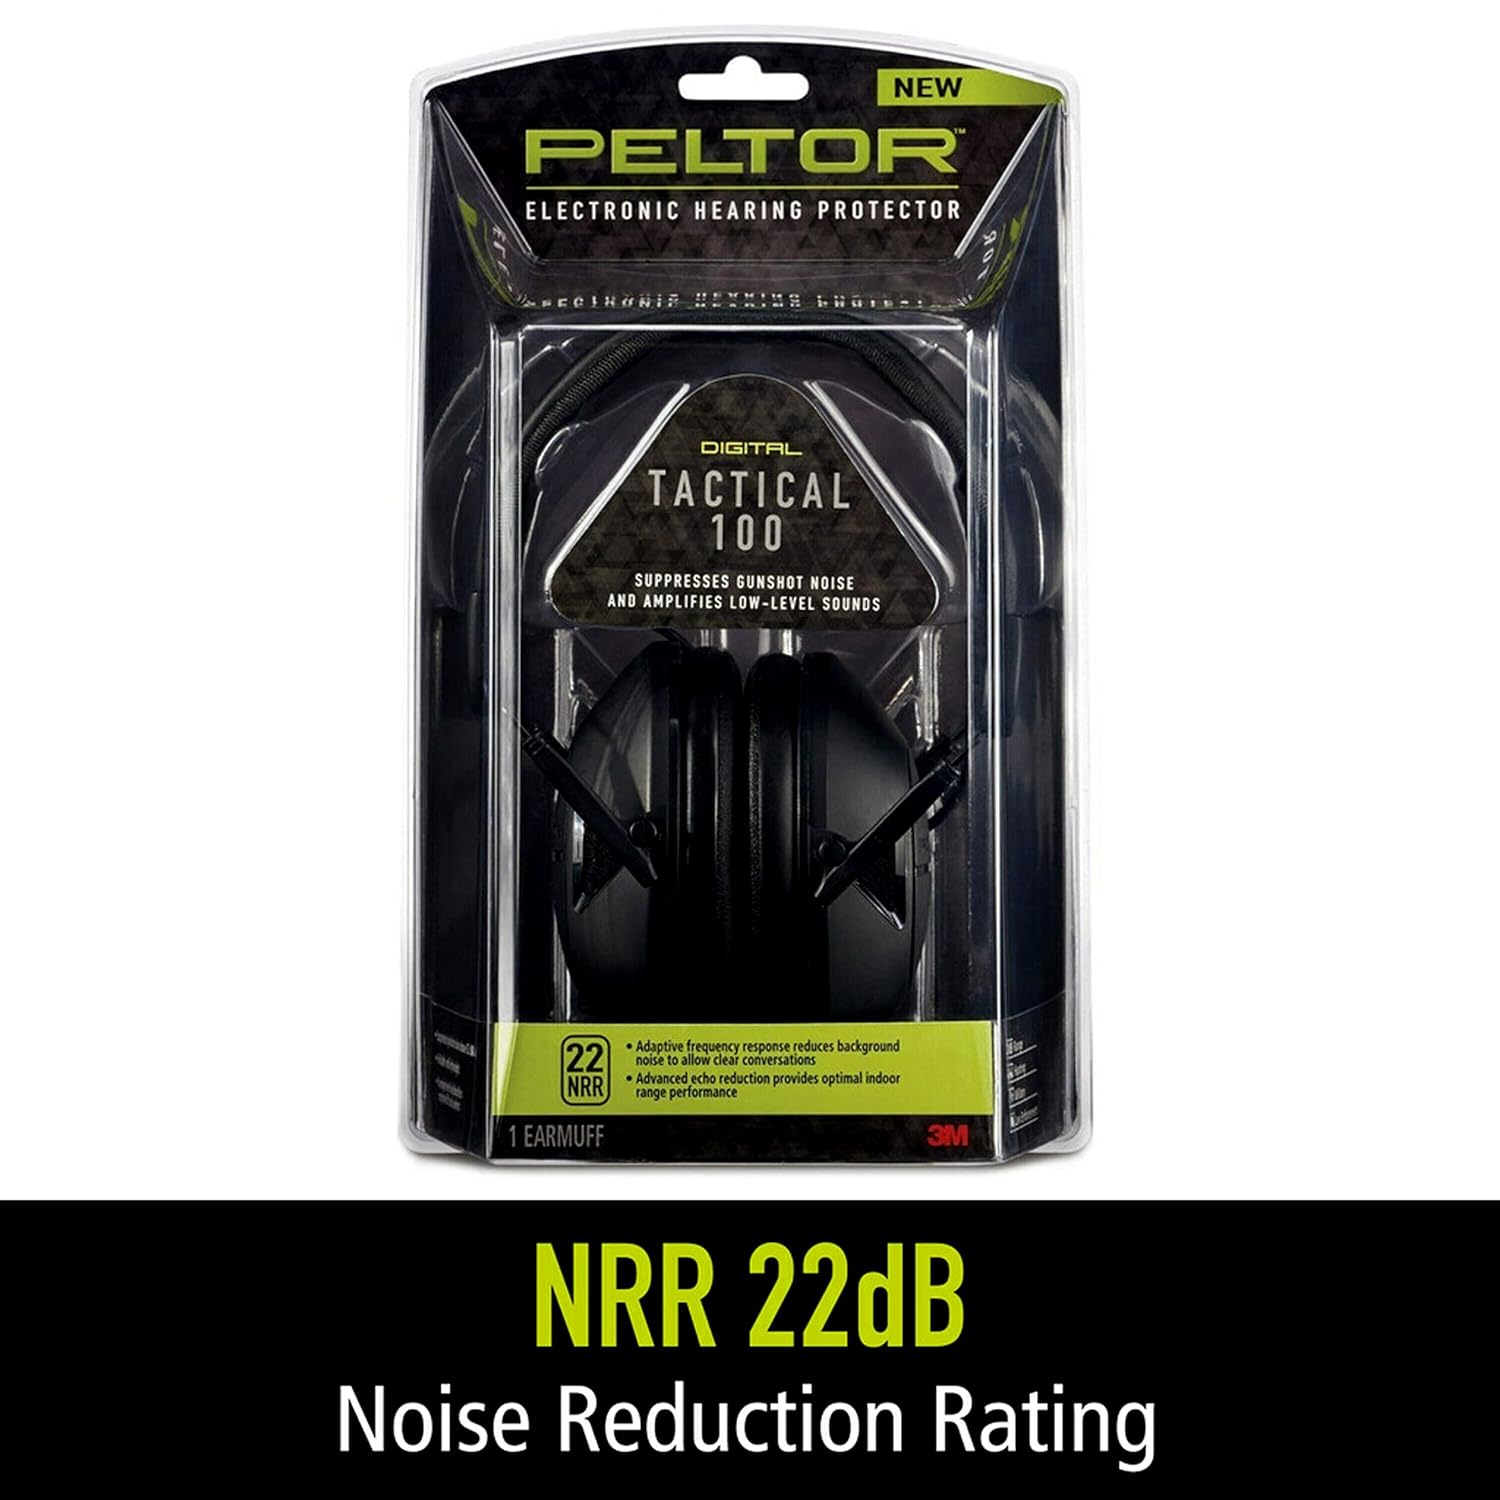 Peltor Sport RangeGuard Electronic Hearing Protector, NRR 21 dB, Ear Protection for the Range, Shooting and Hunting